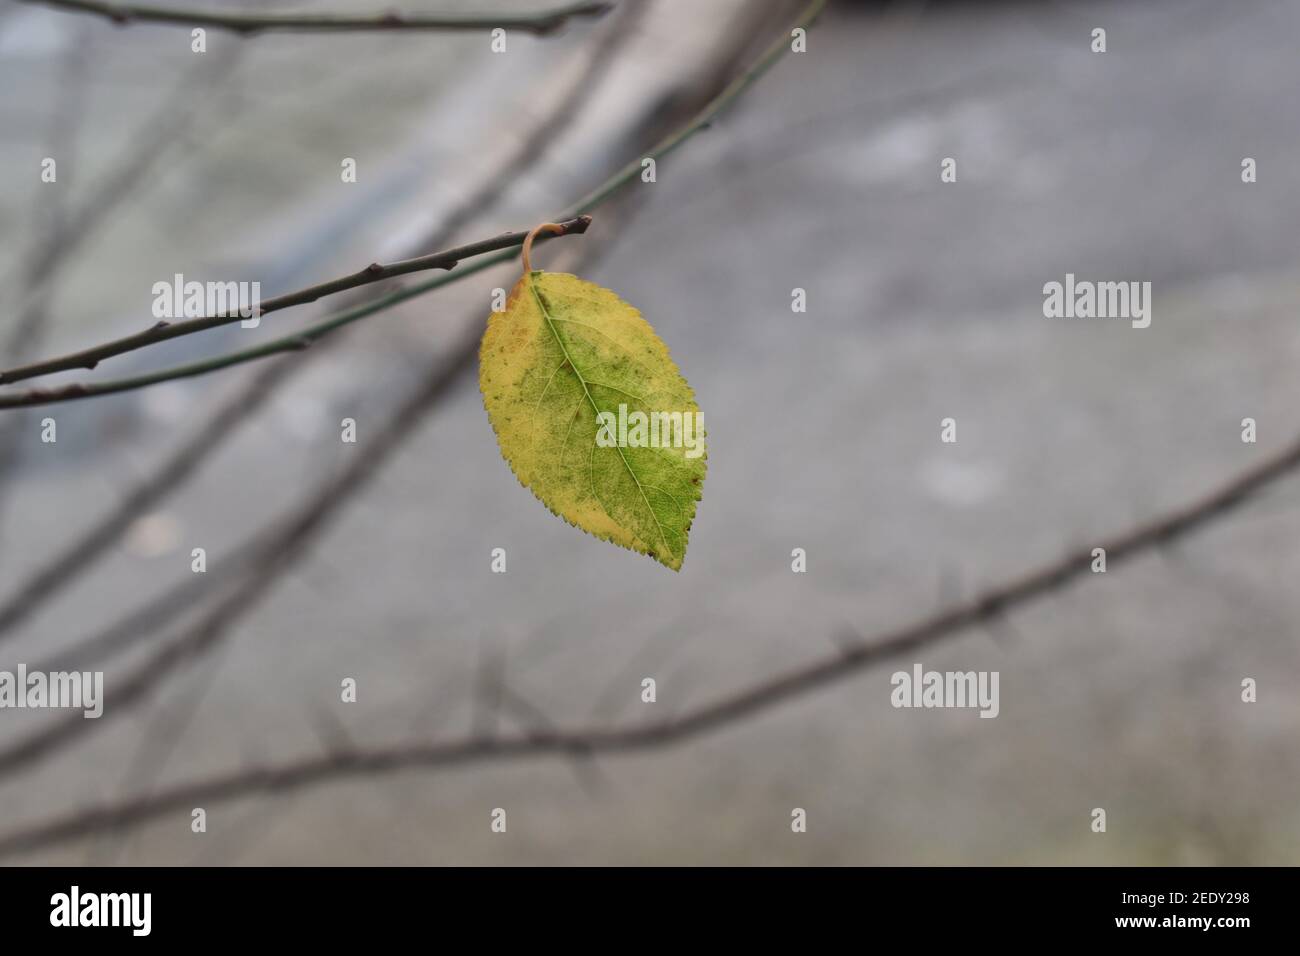 Single green yellow leaf amongst gray background and thin branches. Stock Photo